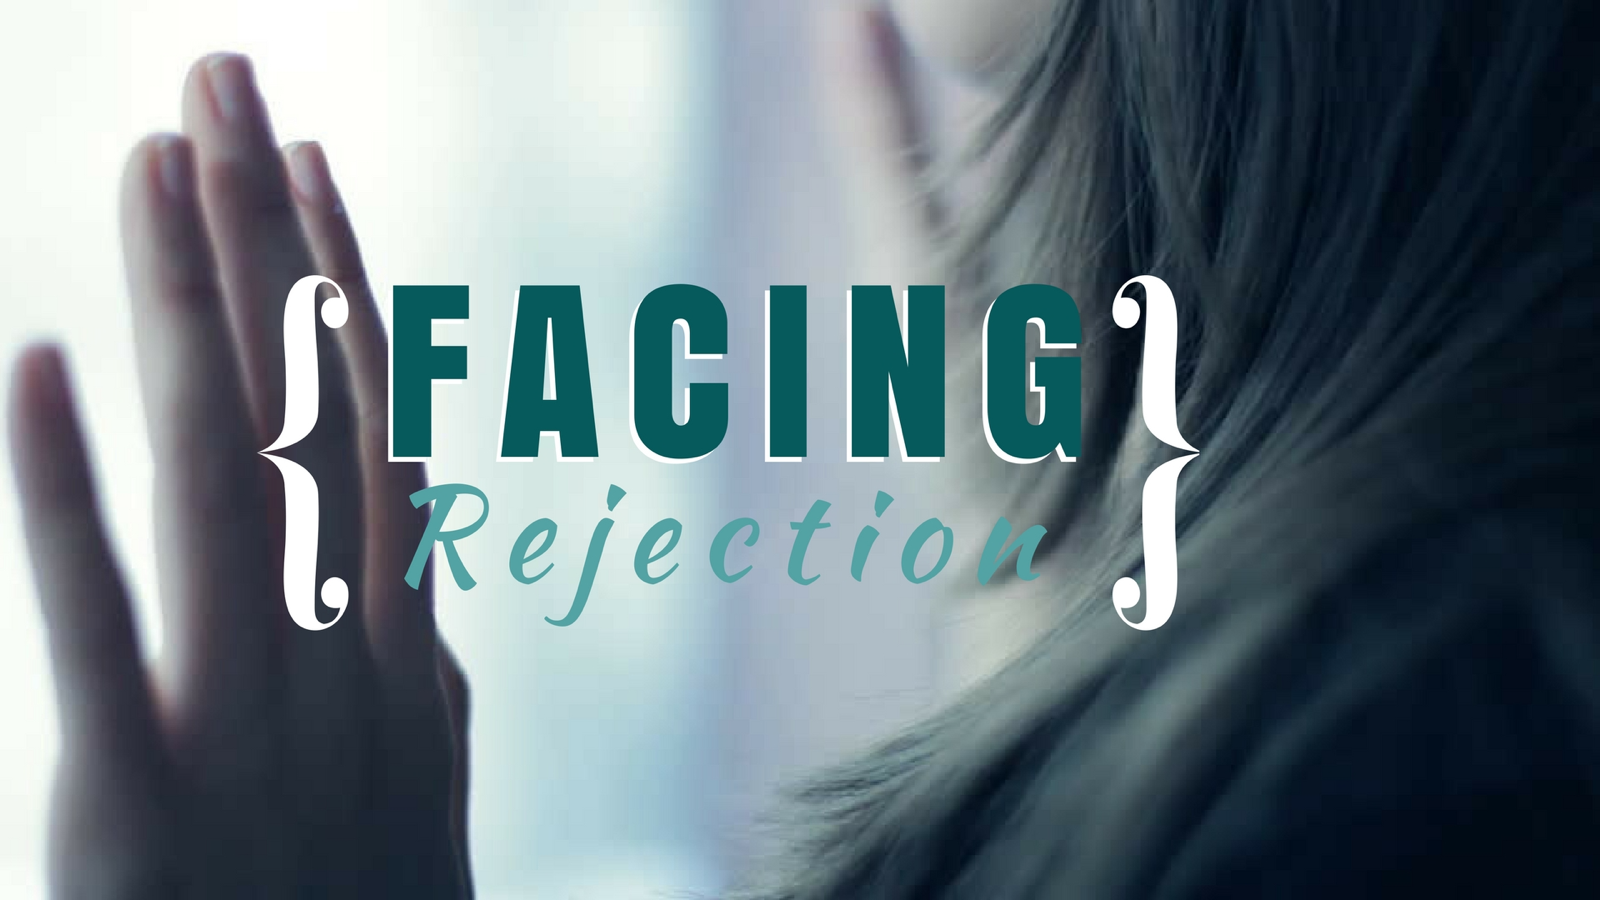 Facing Rejection - 11/12/17